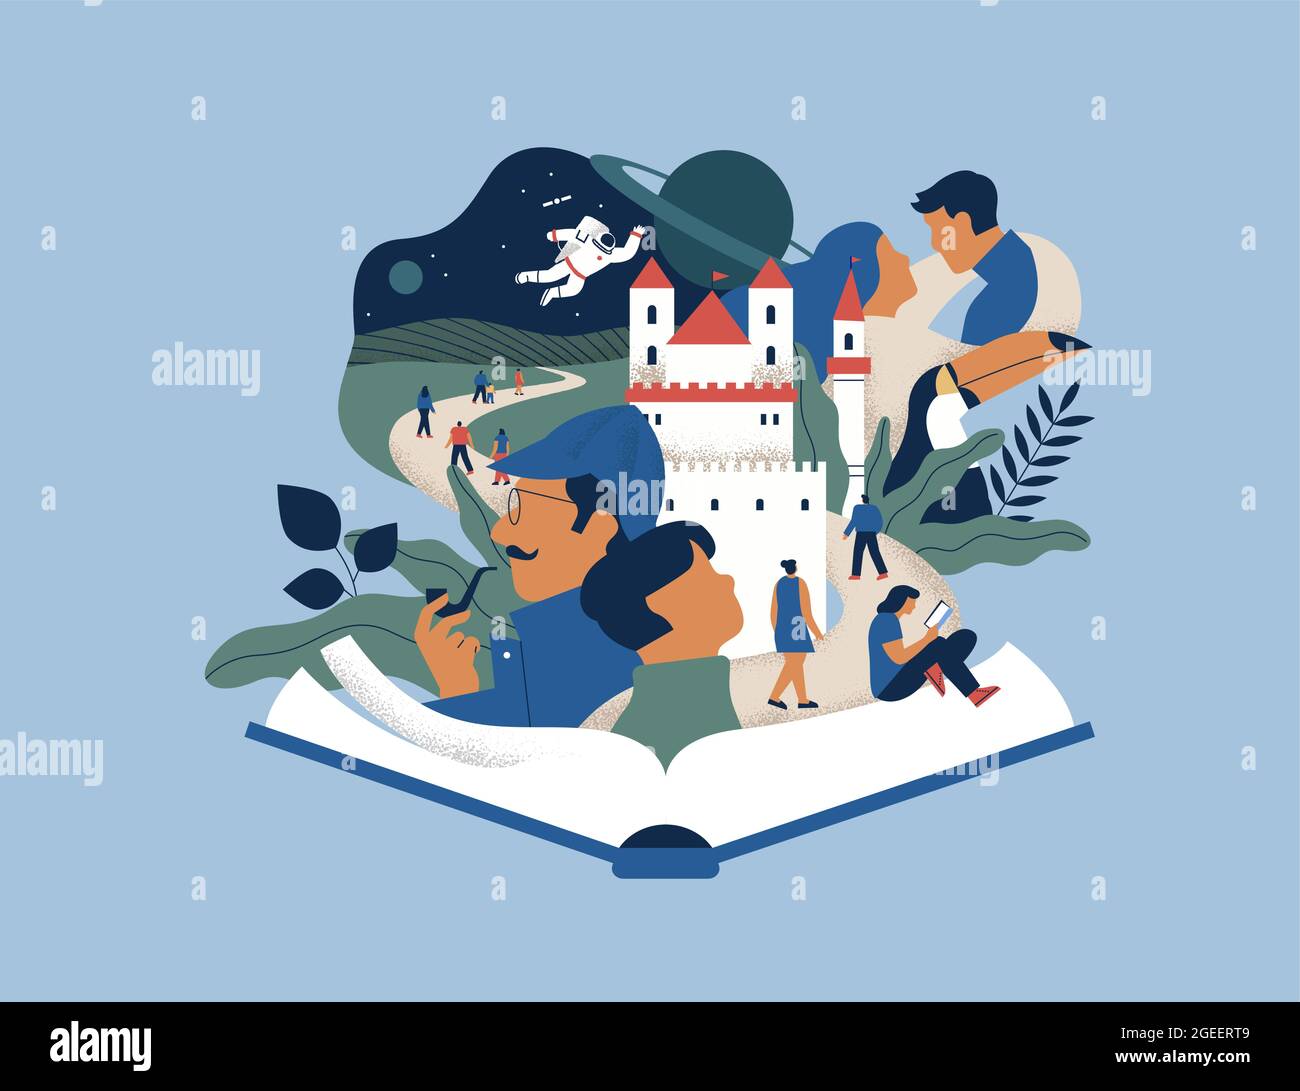 Open book story concept of creative literature imagination with people and fairy tale landscape. Includes romance novel character, nature education, s Stock Vector